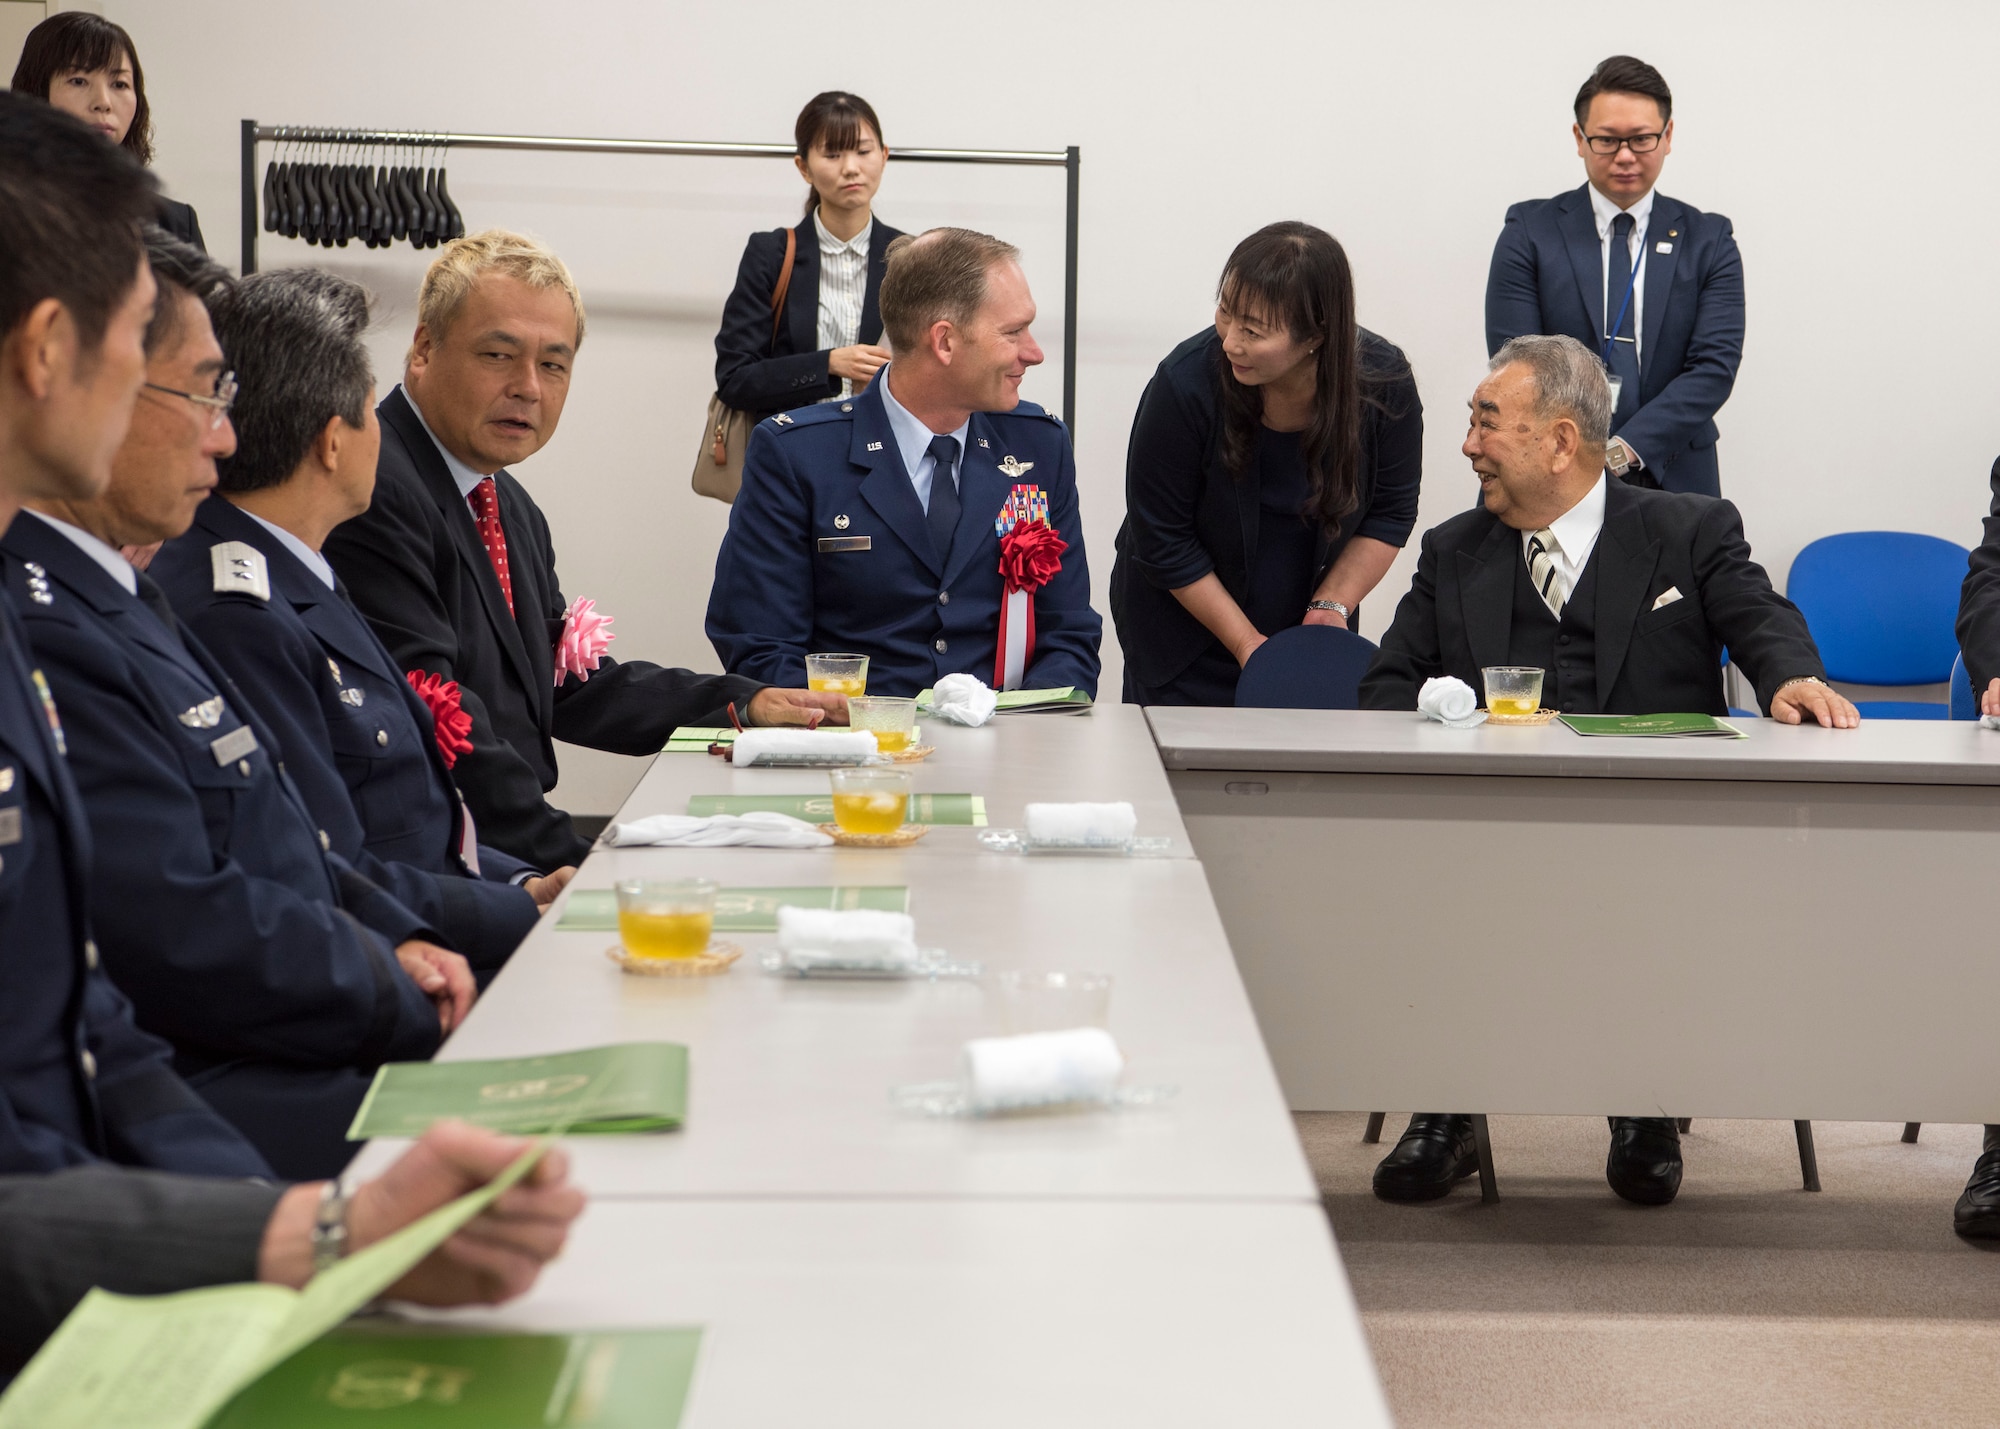 U.S. Air Force Col. Kristopher W. Struve, left, the 35th Fighter Wing commander, speaks with Kazumasa Taneichi, right, the Misawa City Mayor, during a meeting at the Misawa City 60th anniversary celebration ceremony held at the Misawa International Center in Misawa City, Japan, Sept. 1, 2018. Taneichi expressed gratitude to all parties that support and promote Misawa City’s growth. (U.S. Air Force photo by Airman 1st Class Collette Brooks)